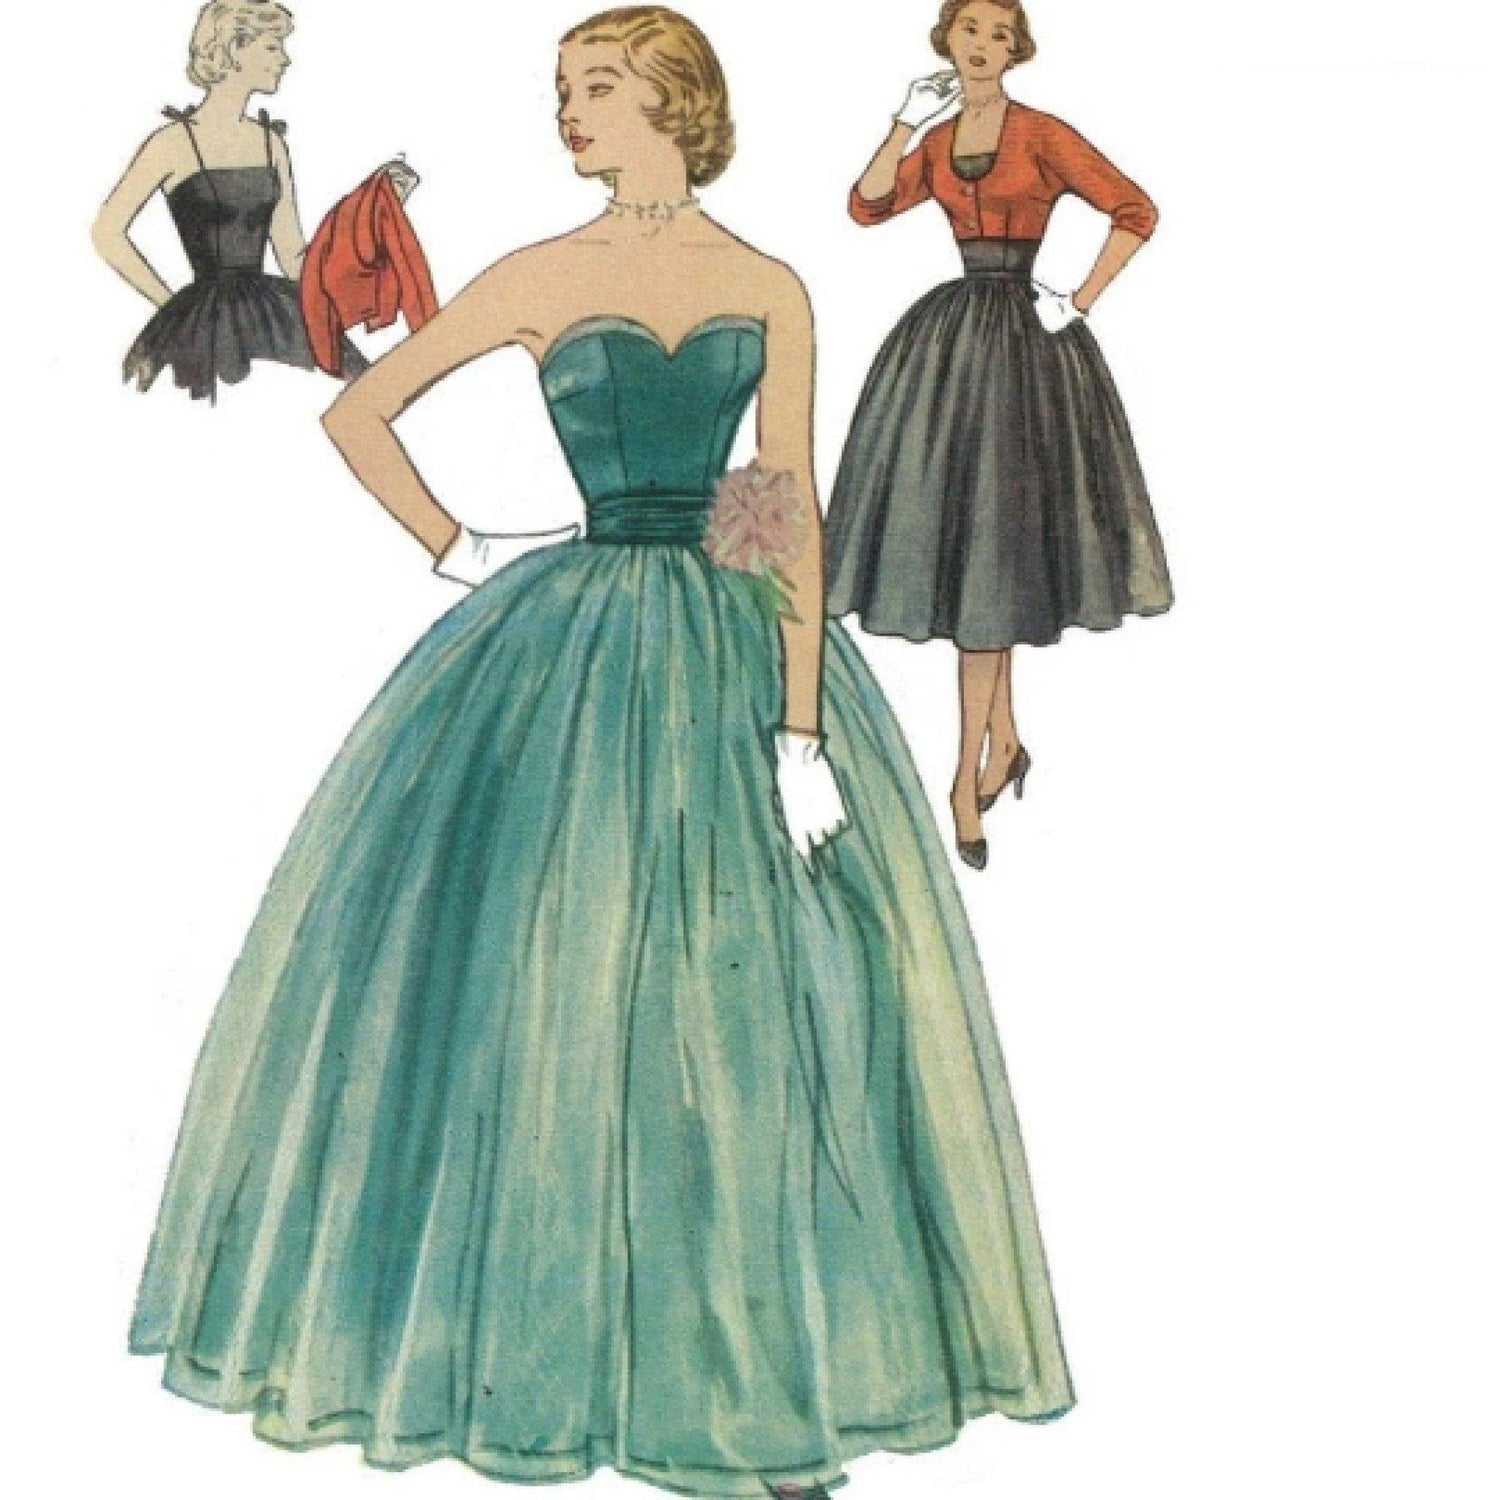 Pin by Pam Hancock on vintage sewing patterns | Vintage fashion sketches,  1950s fashion women, Vintage fashion